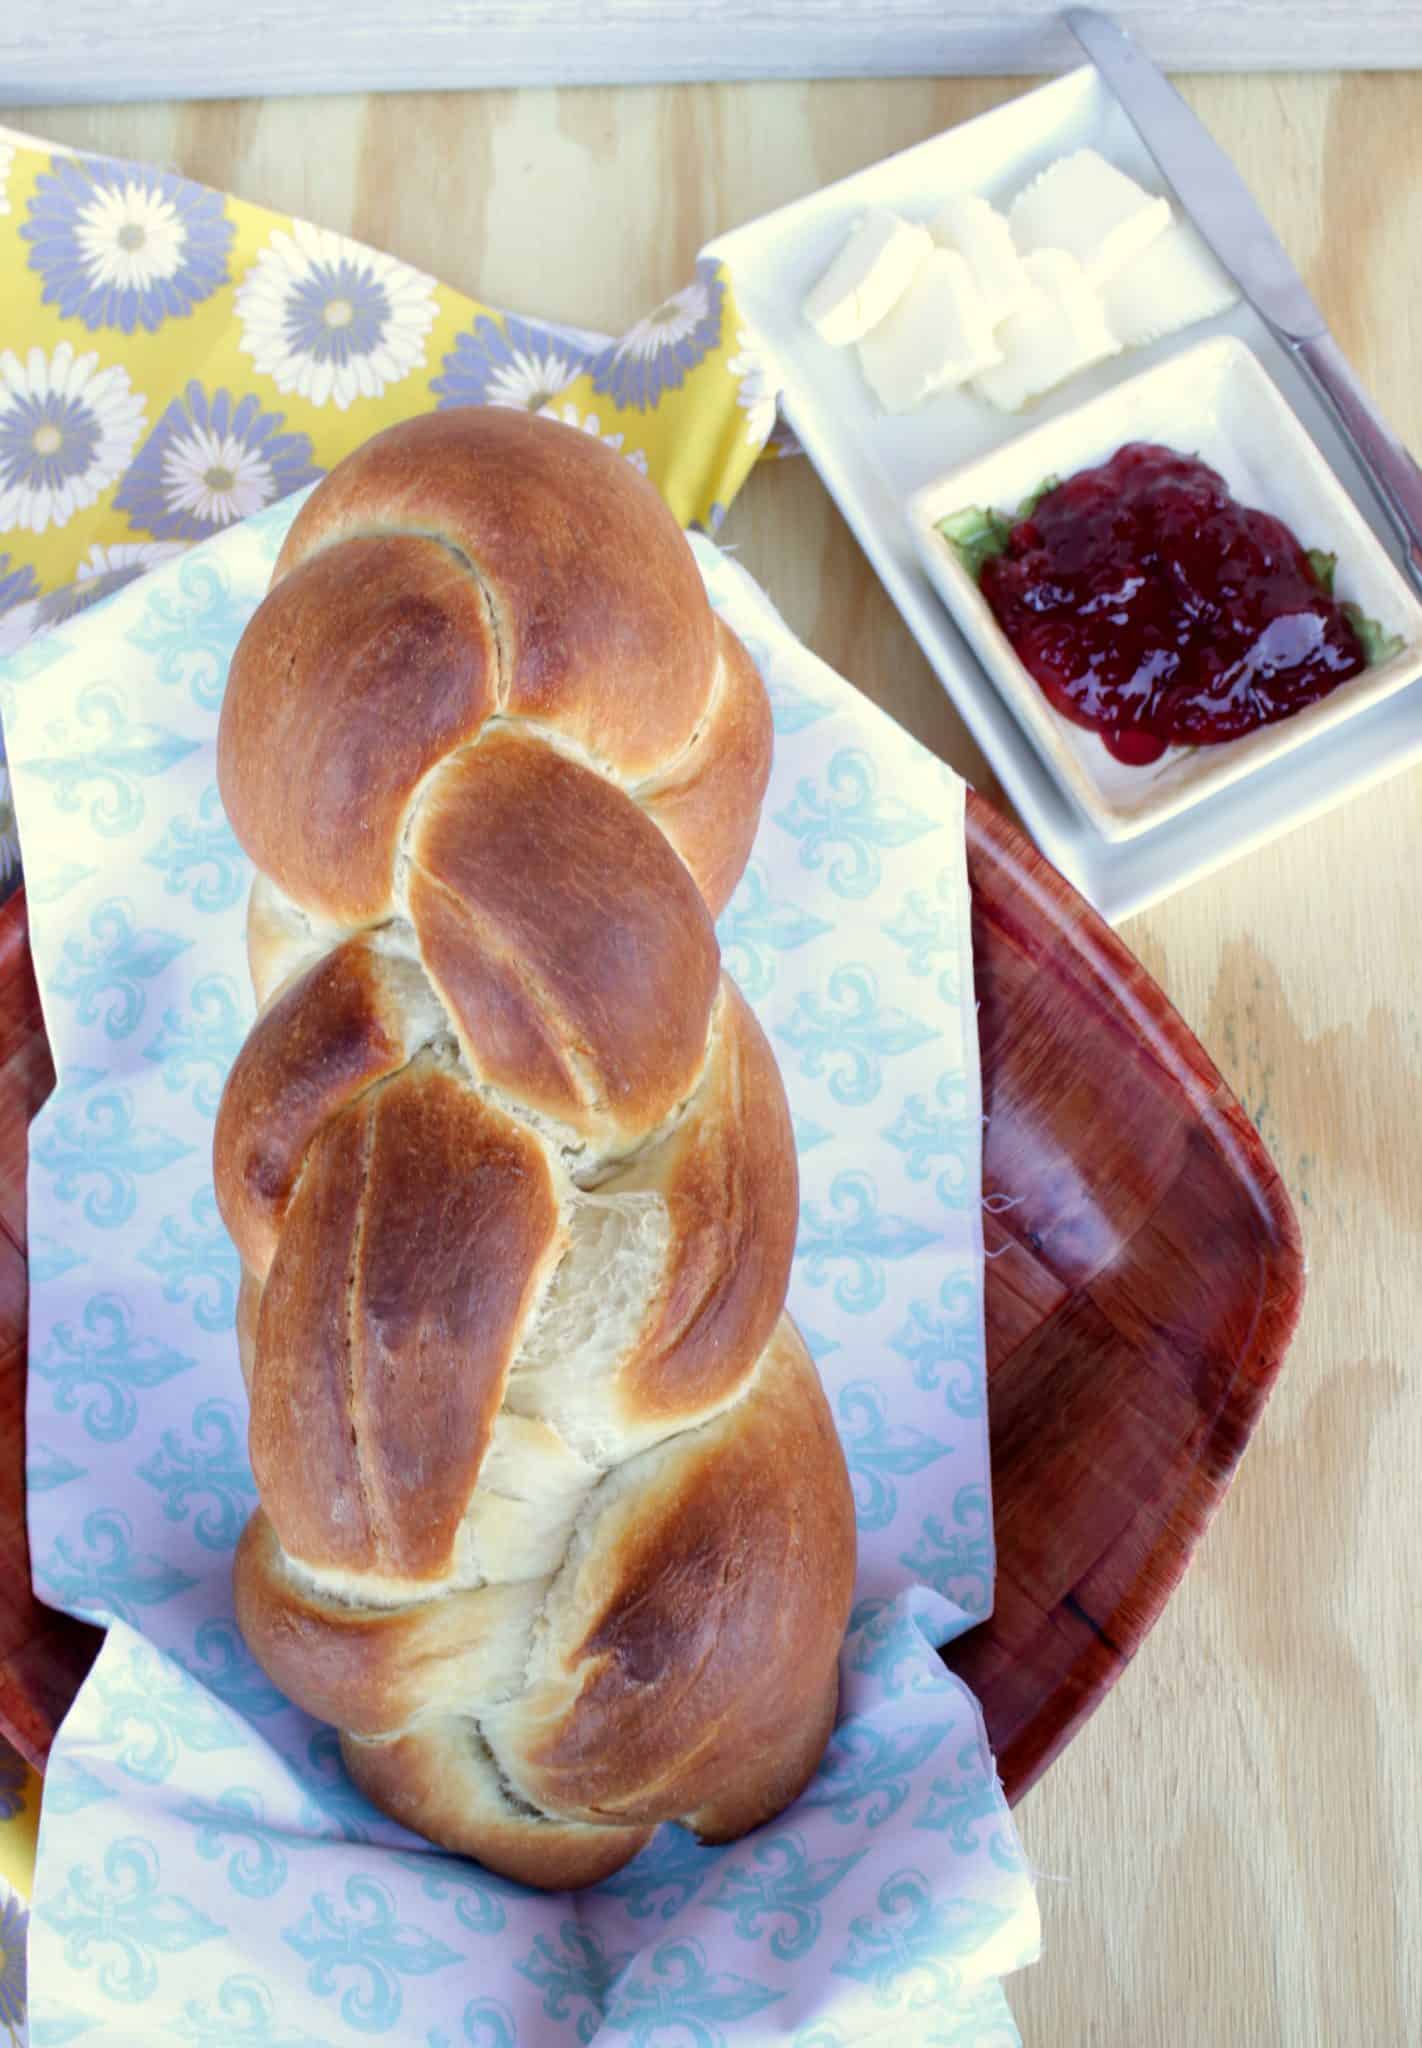 Zupfe | Swiss Braided bread is ready to serve